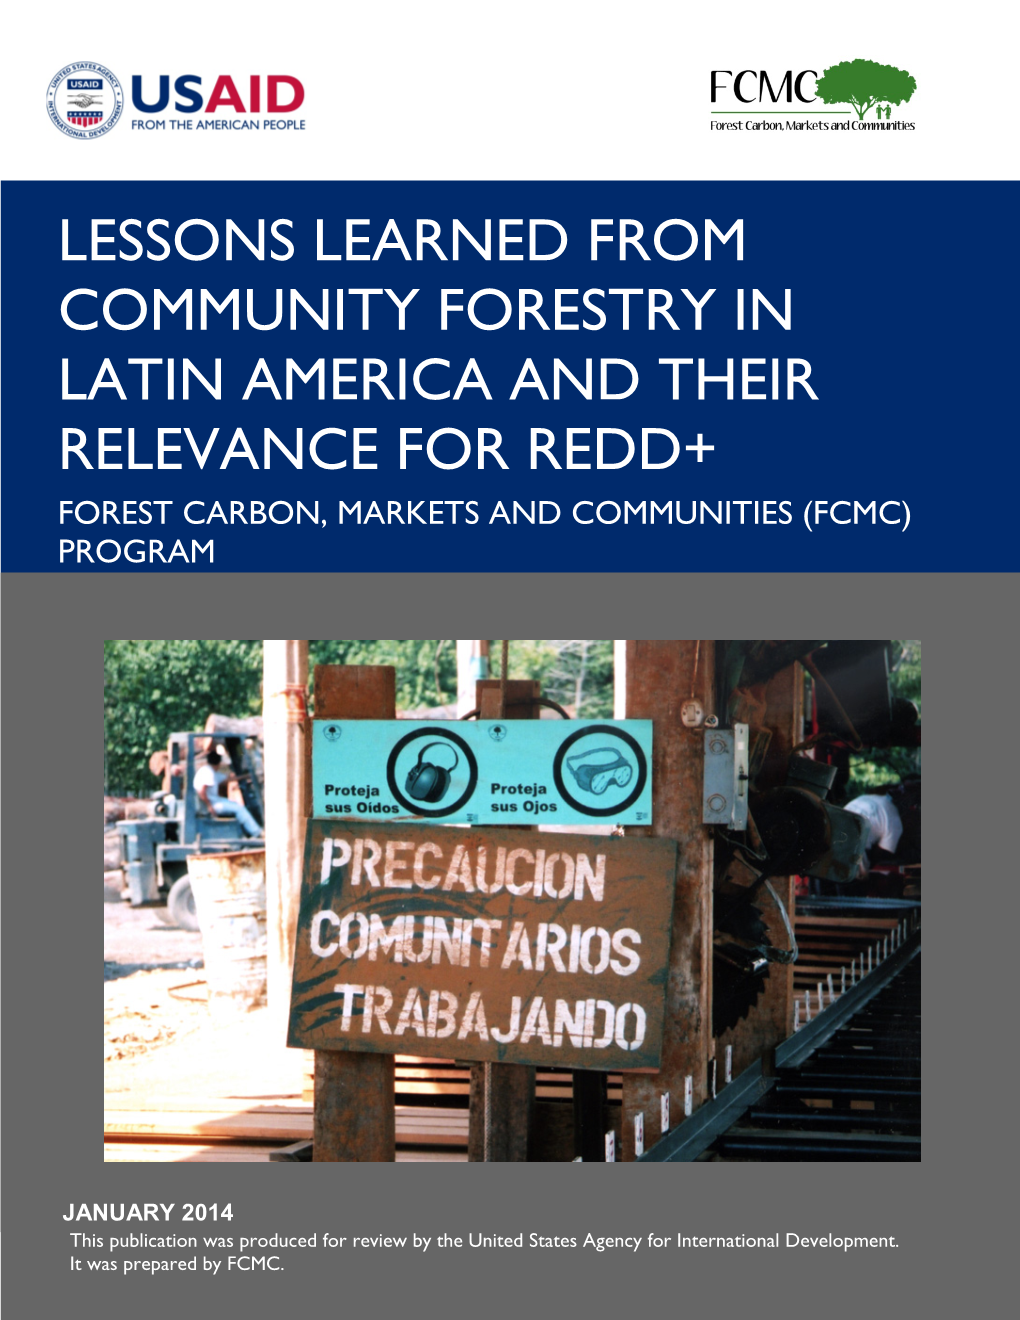 2014. Lessons Learned from Community Forestry in Latin America and Their Relevance for REDD+